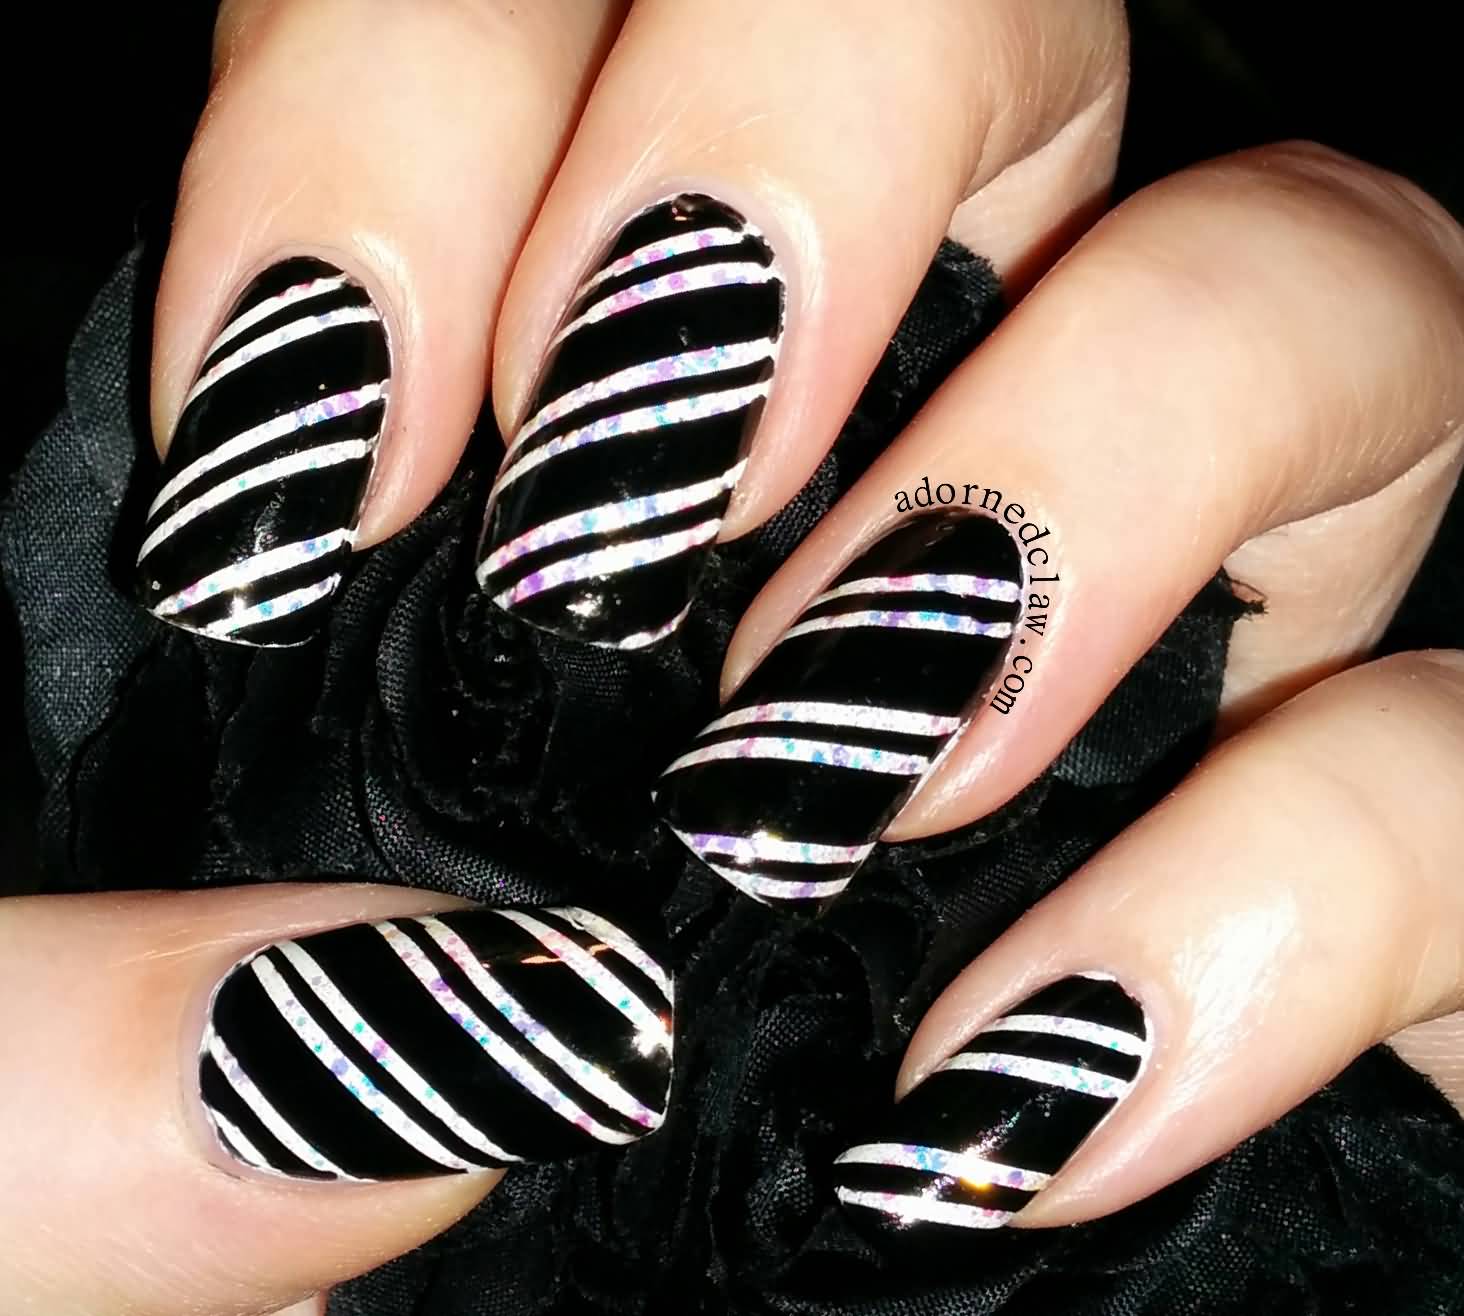 Black Nails With White Candy Cane Stripes Nail Art